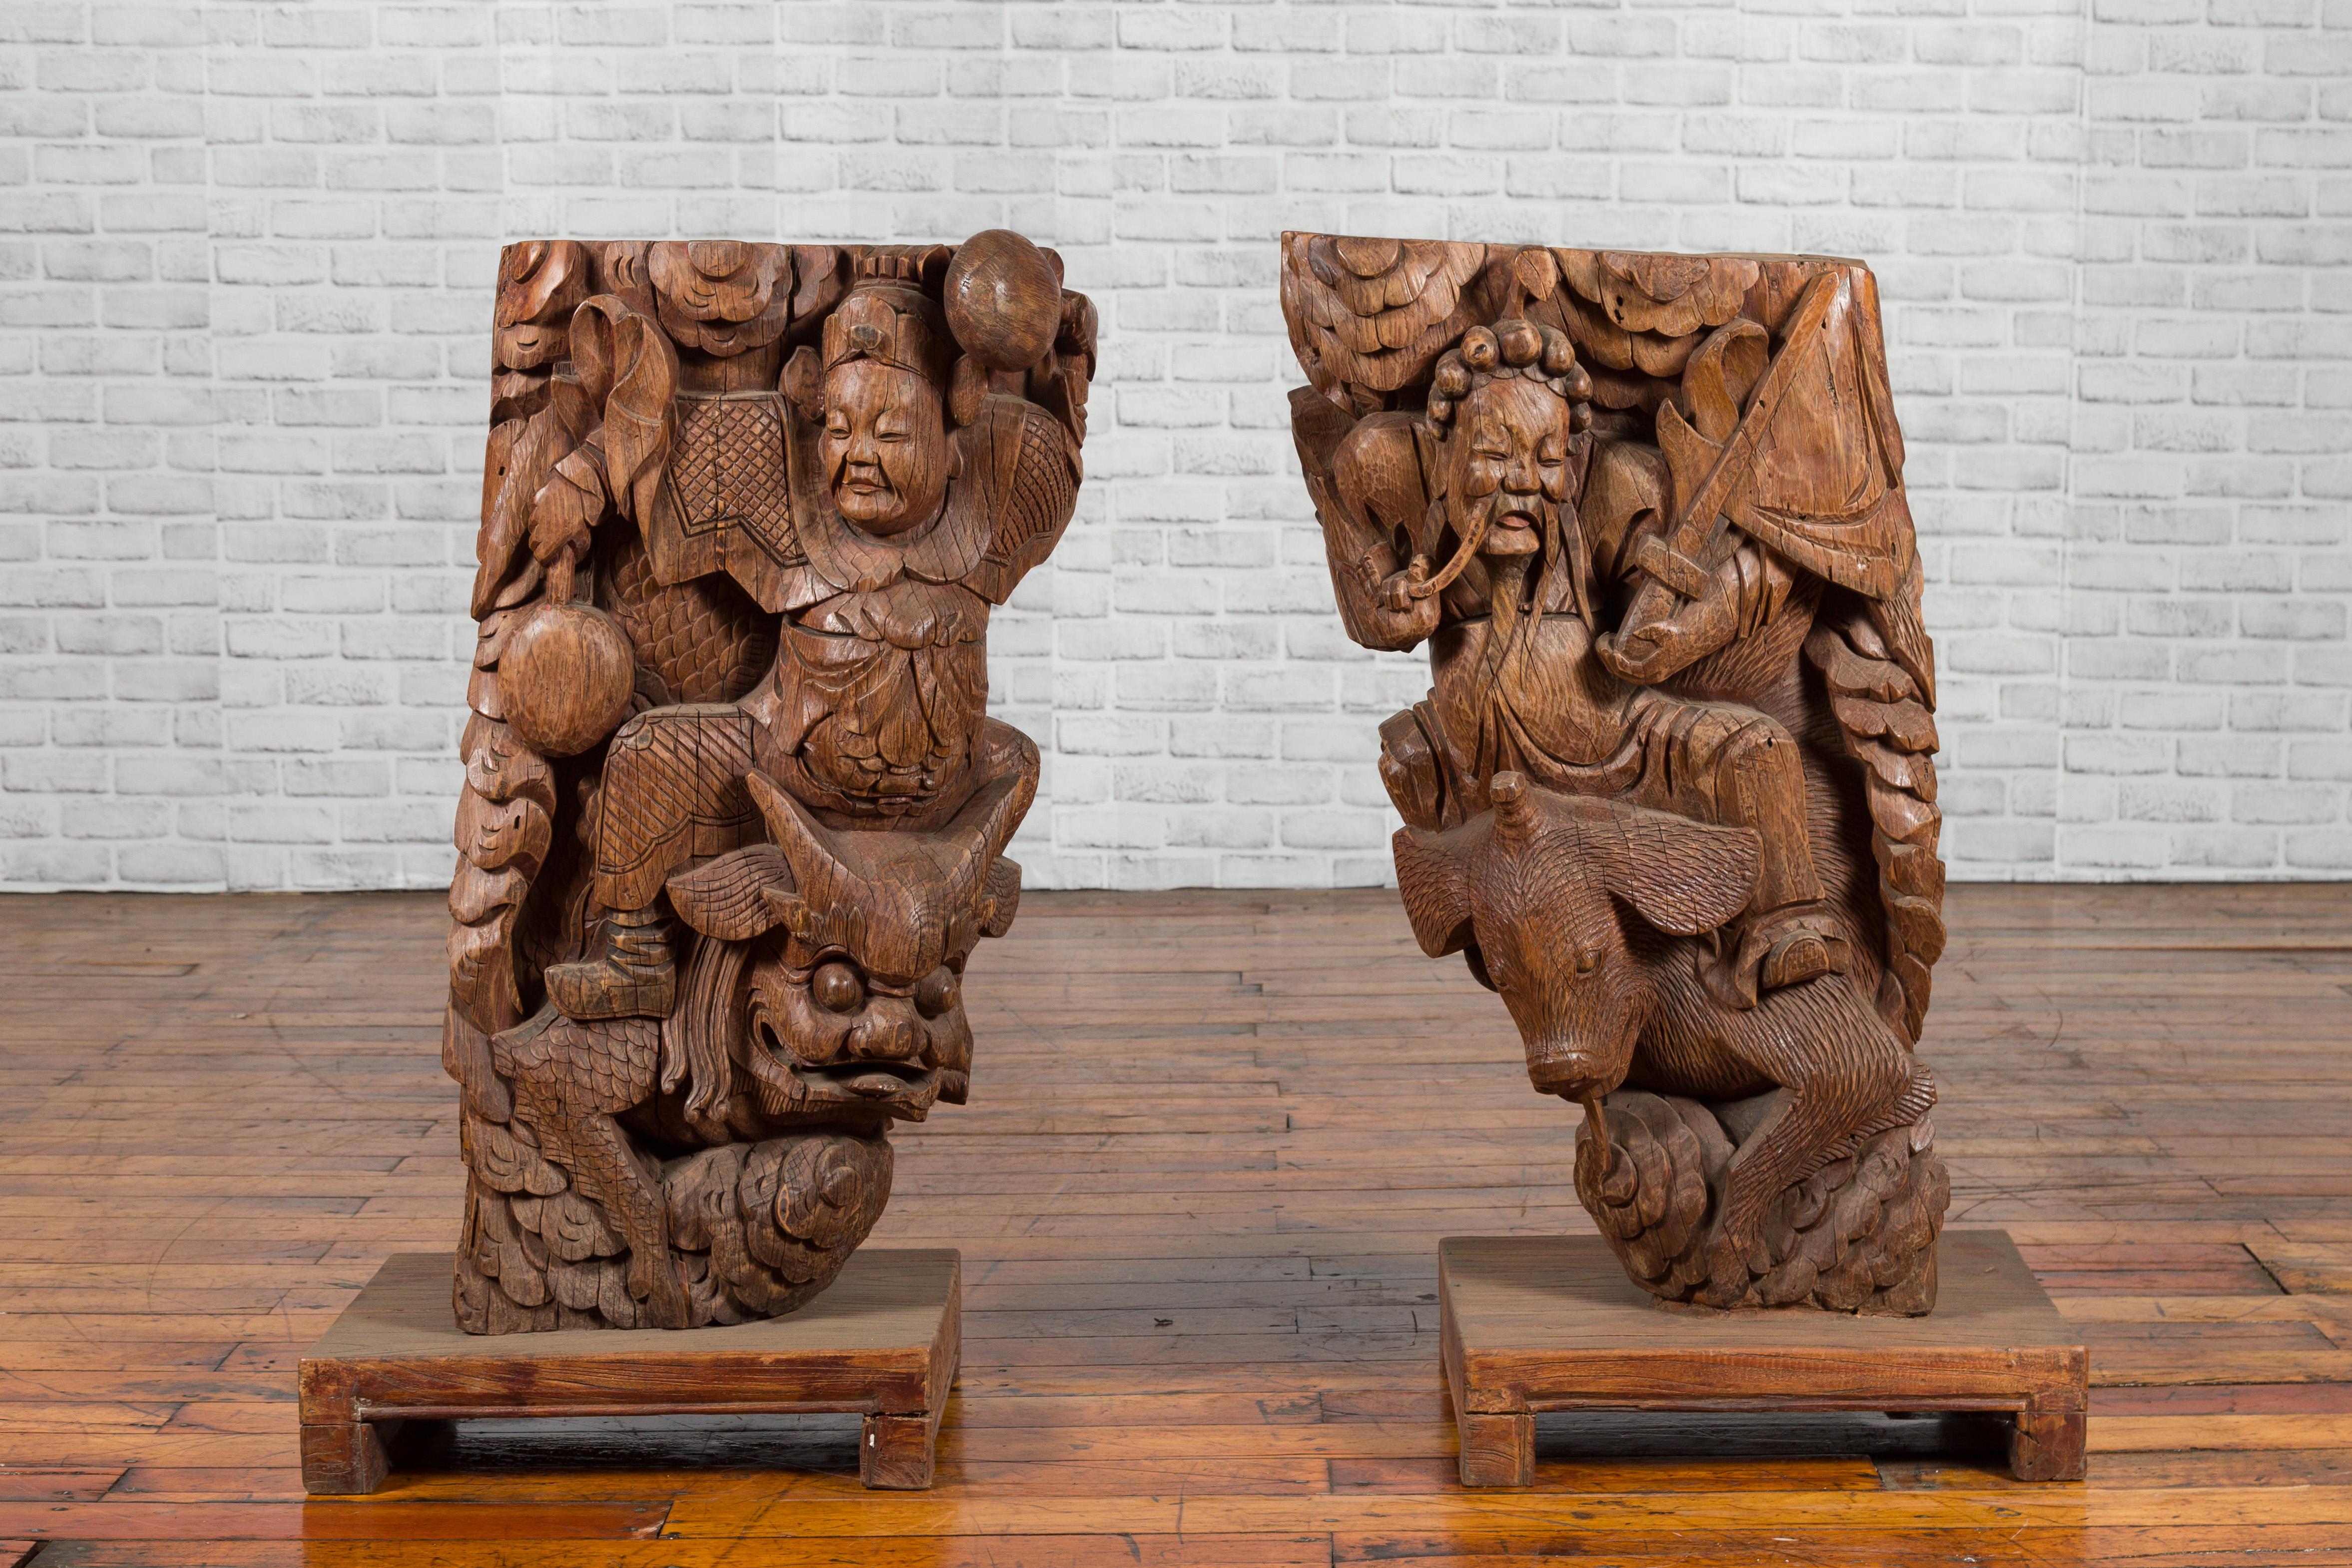 A pair of Chinese Qing Dynasty hand carved temple corbels from the early 19th century, depicting warriors. Created in China during the Qing Dynasty, this pair of Chinese temple corbels was skillfully hand carved in wood. Each corbel depicts a